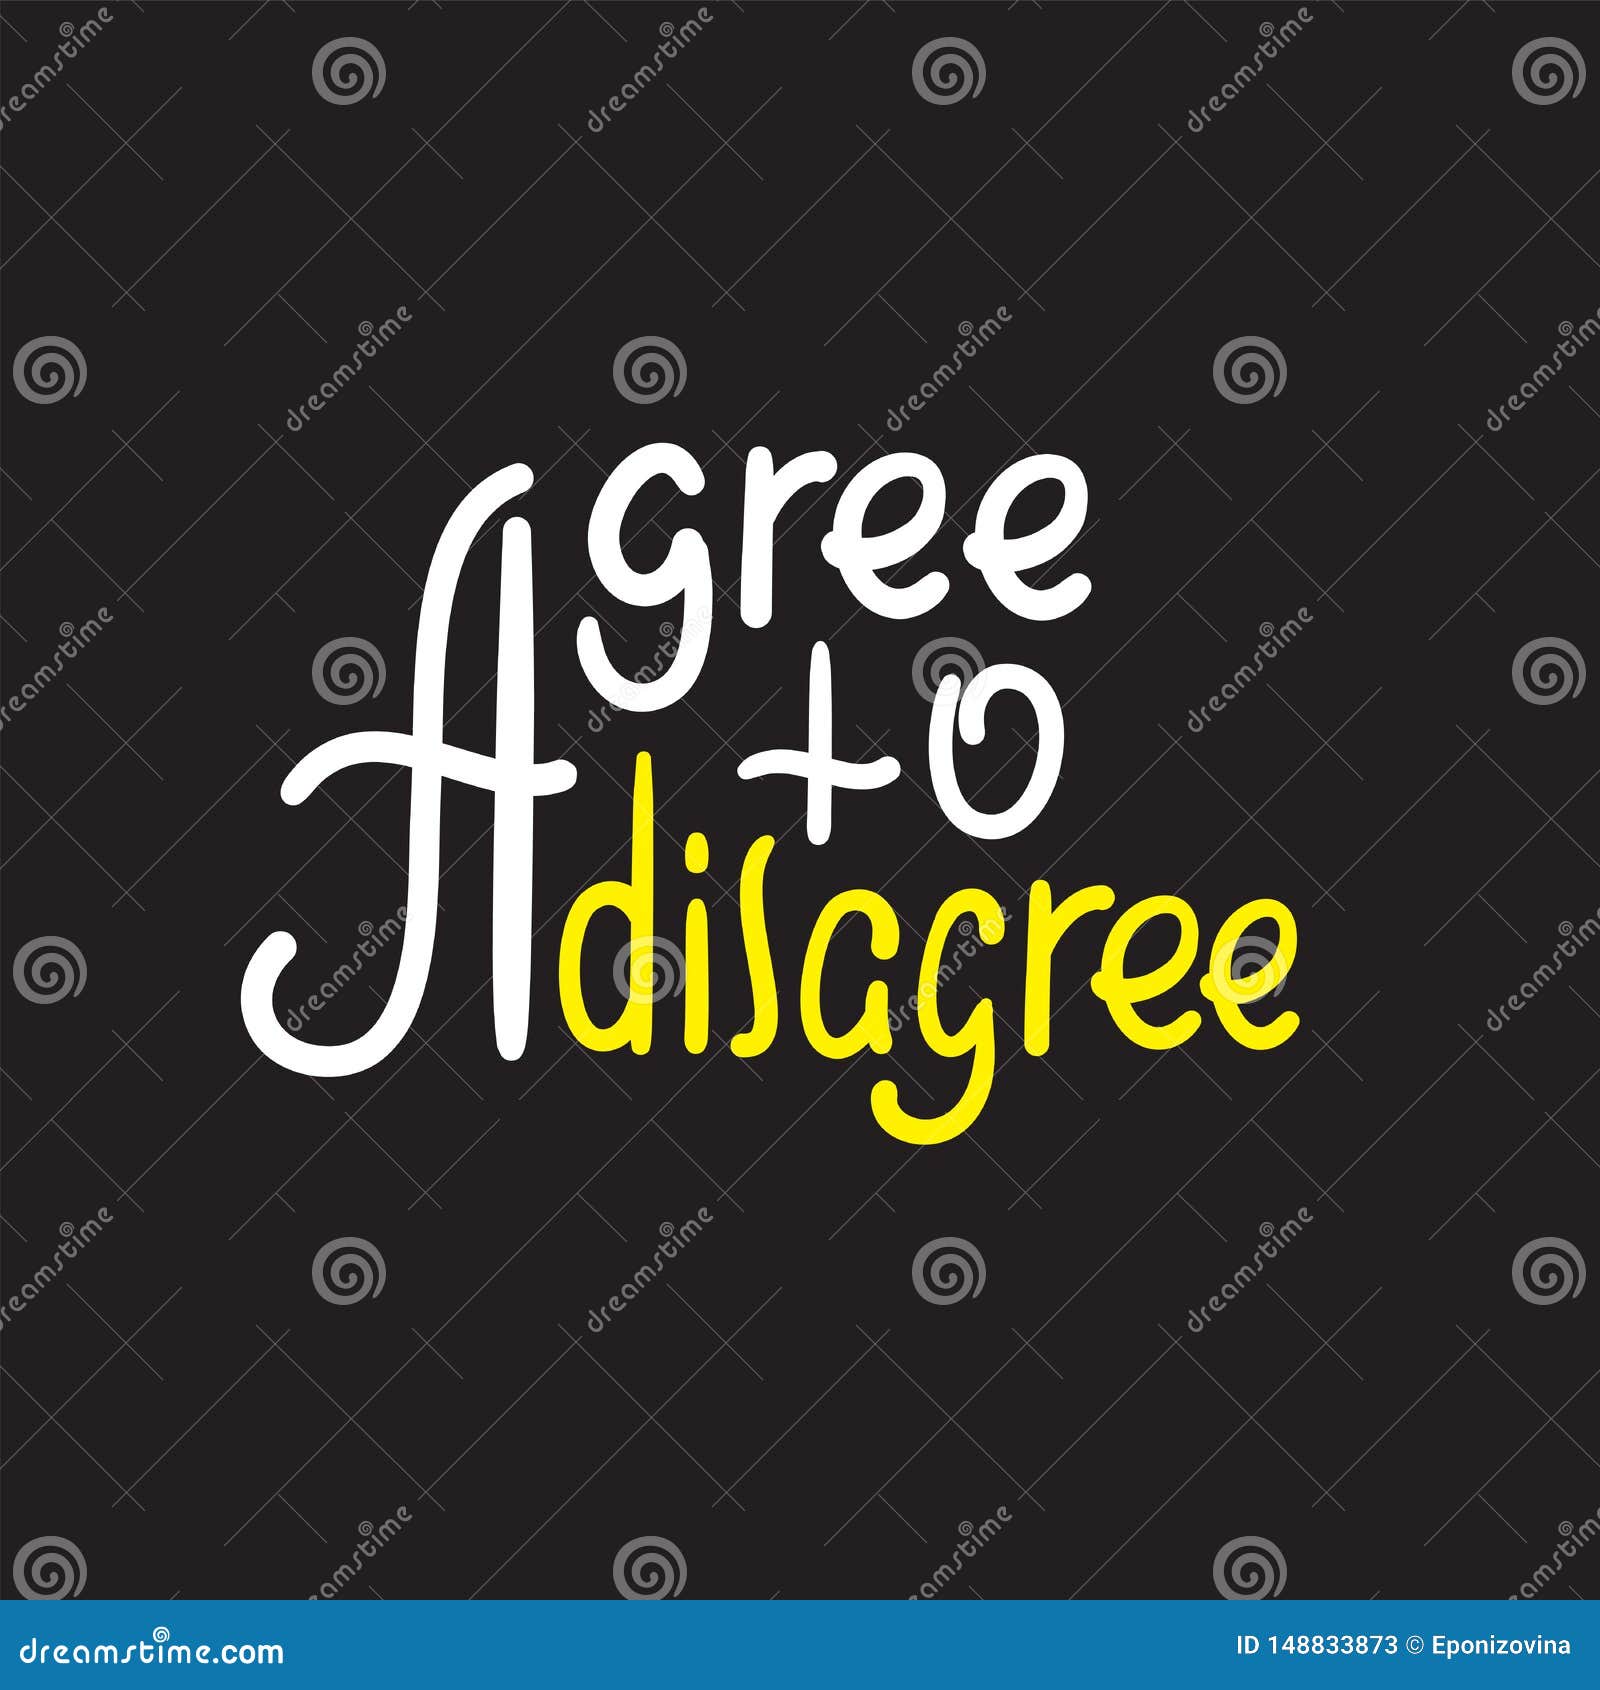 Agree To Disagree - Simple Inspire Motivational Quote. Hand Drawn  Lettering. Youth Slang, Idiom Stock Vector - Illustration of battle,  agreement: 148833873